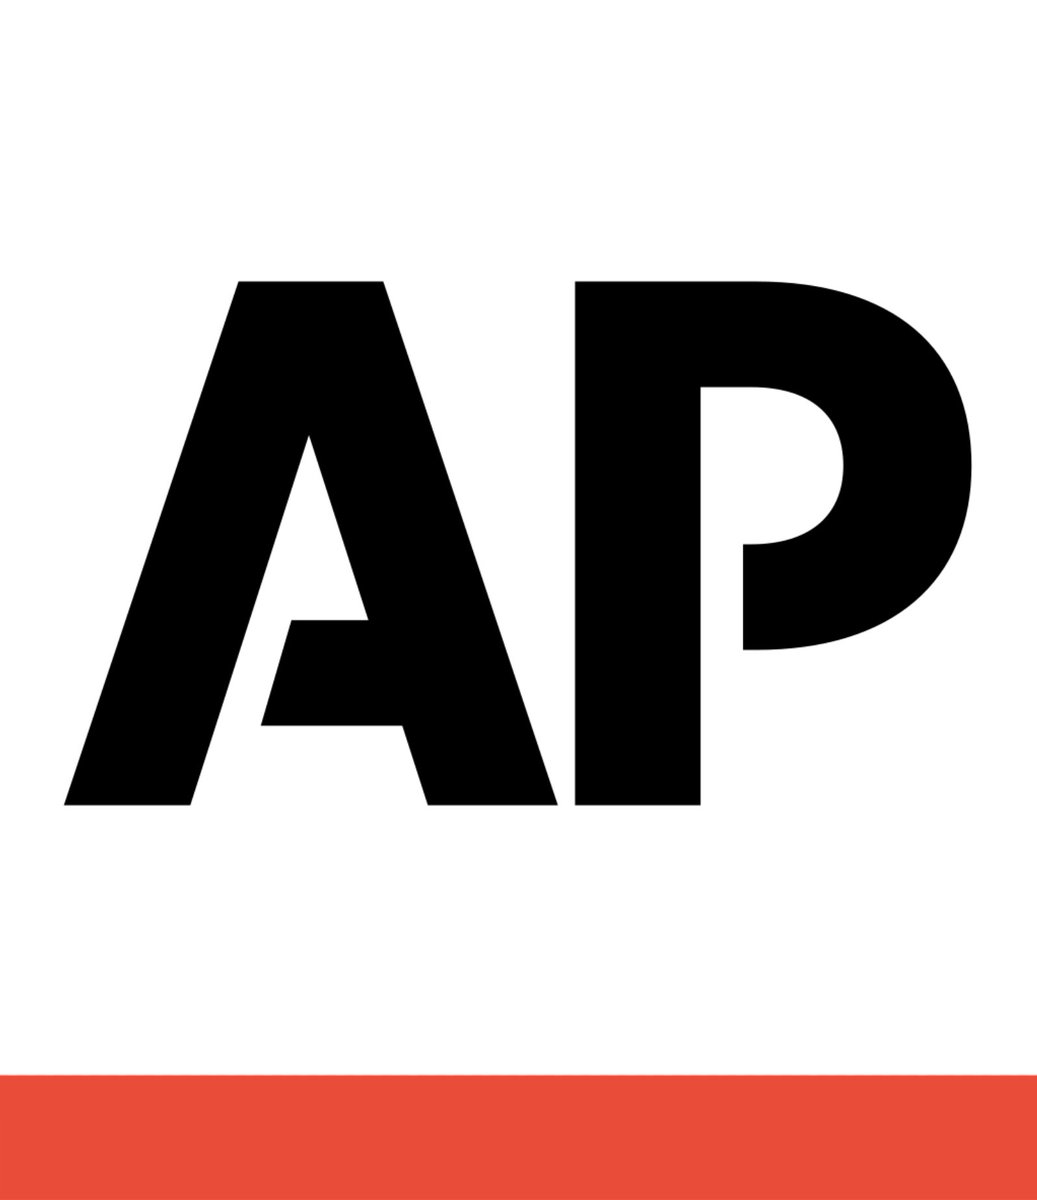 As tallies come in, I will count on  @AP’s election projections:  https://apnews.com/hub/election-2020Here are some other election projections you can trust:• ABC:  https://abcnews.go.com/Elections • CBS:  https://www.cbsnews.com/live-updates/2020-election-live-updates-2020-11-02/• NBC:  https://www.nbcnews.com/politics/2020-election• CNN:  https://www.cnn.com/election/2020 /6